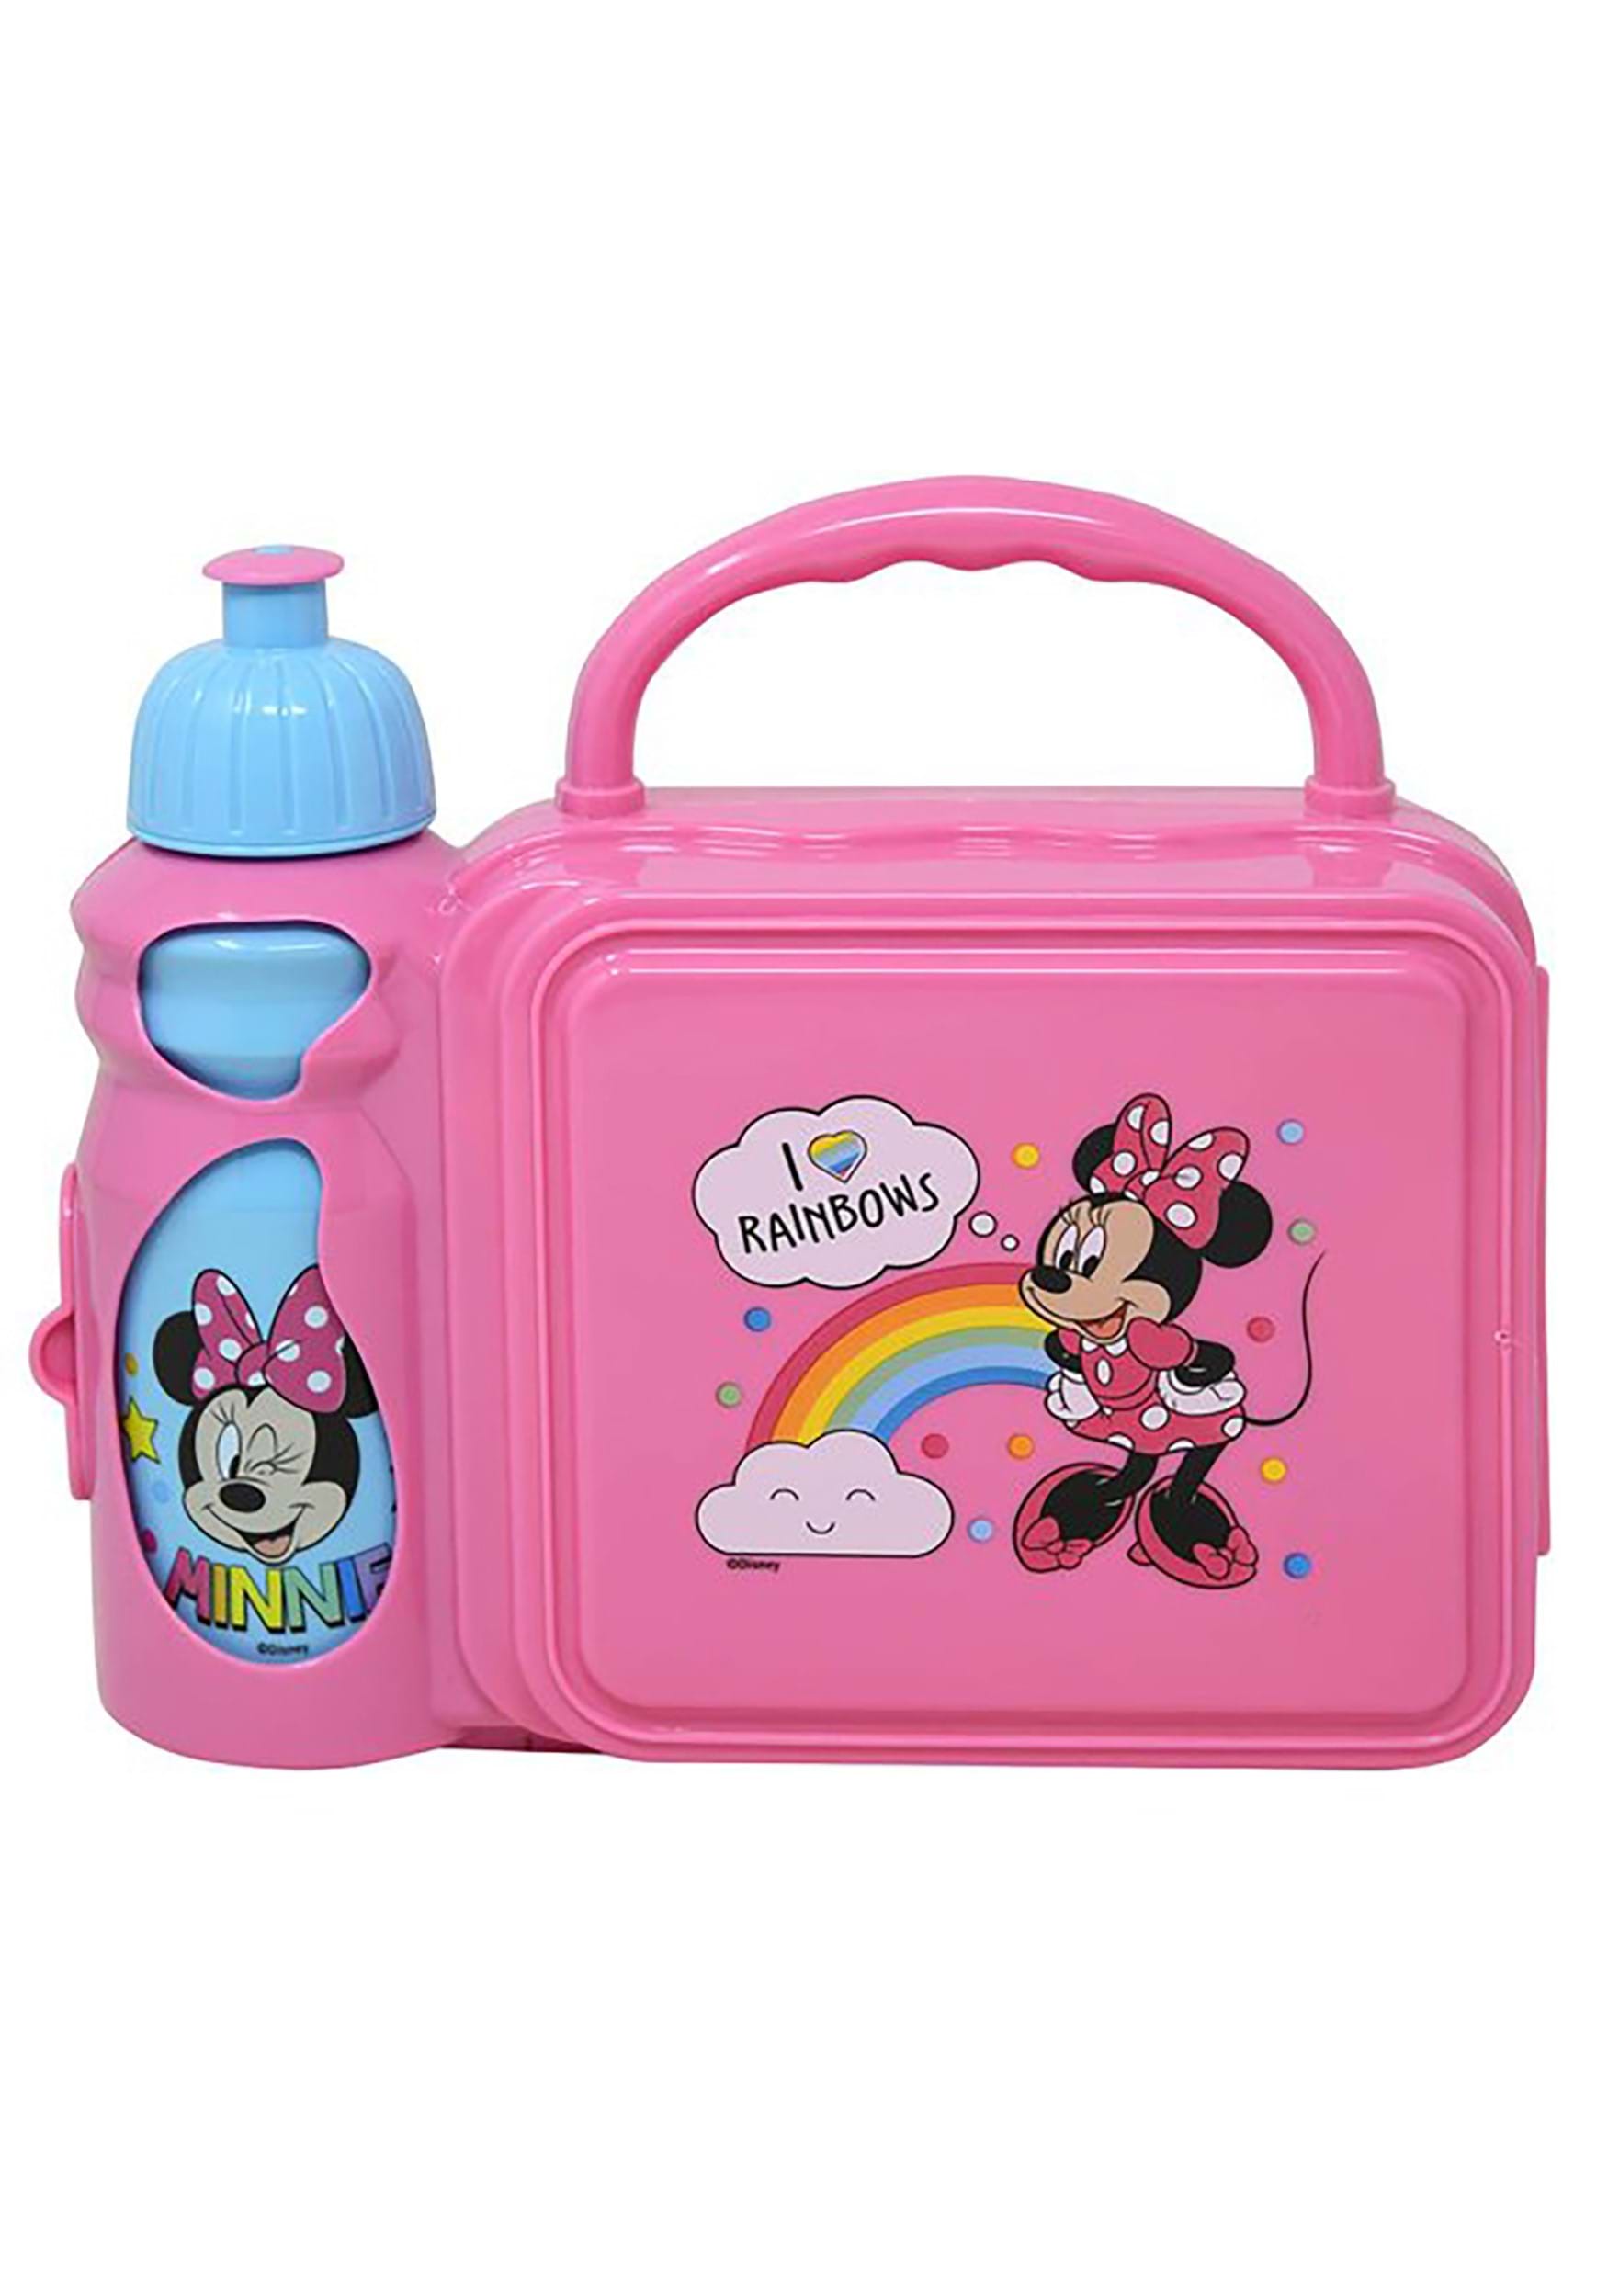 https://images.fun.com/products/83851/1-1/minnie-mouse-combo-lunch-box-with-water-bottle.jpg